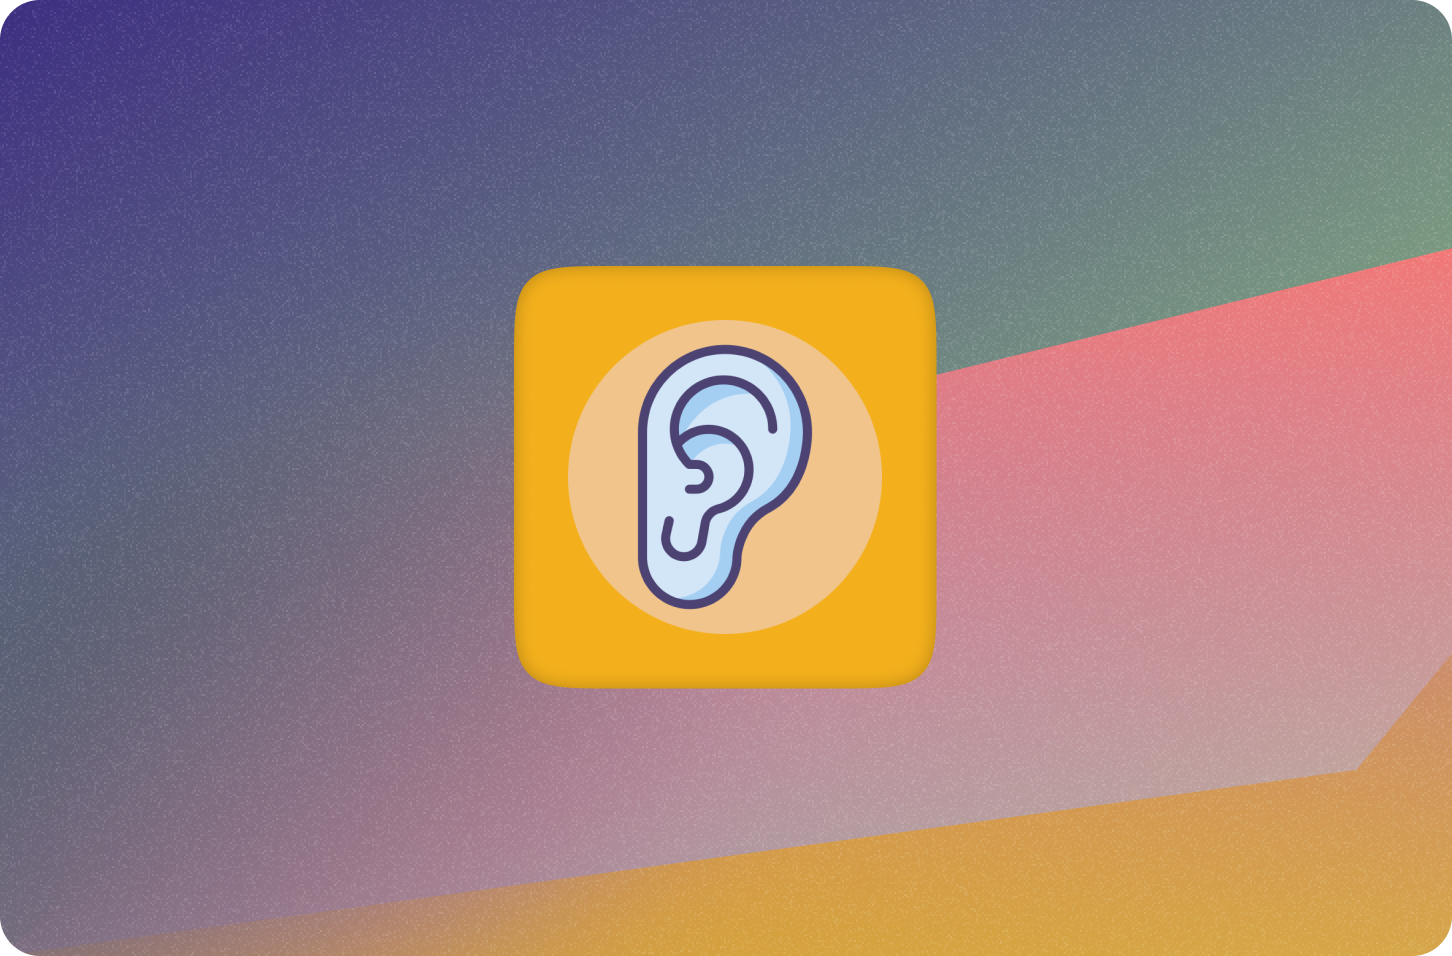 icon of an ear to represent event driven programming